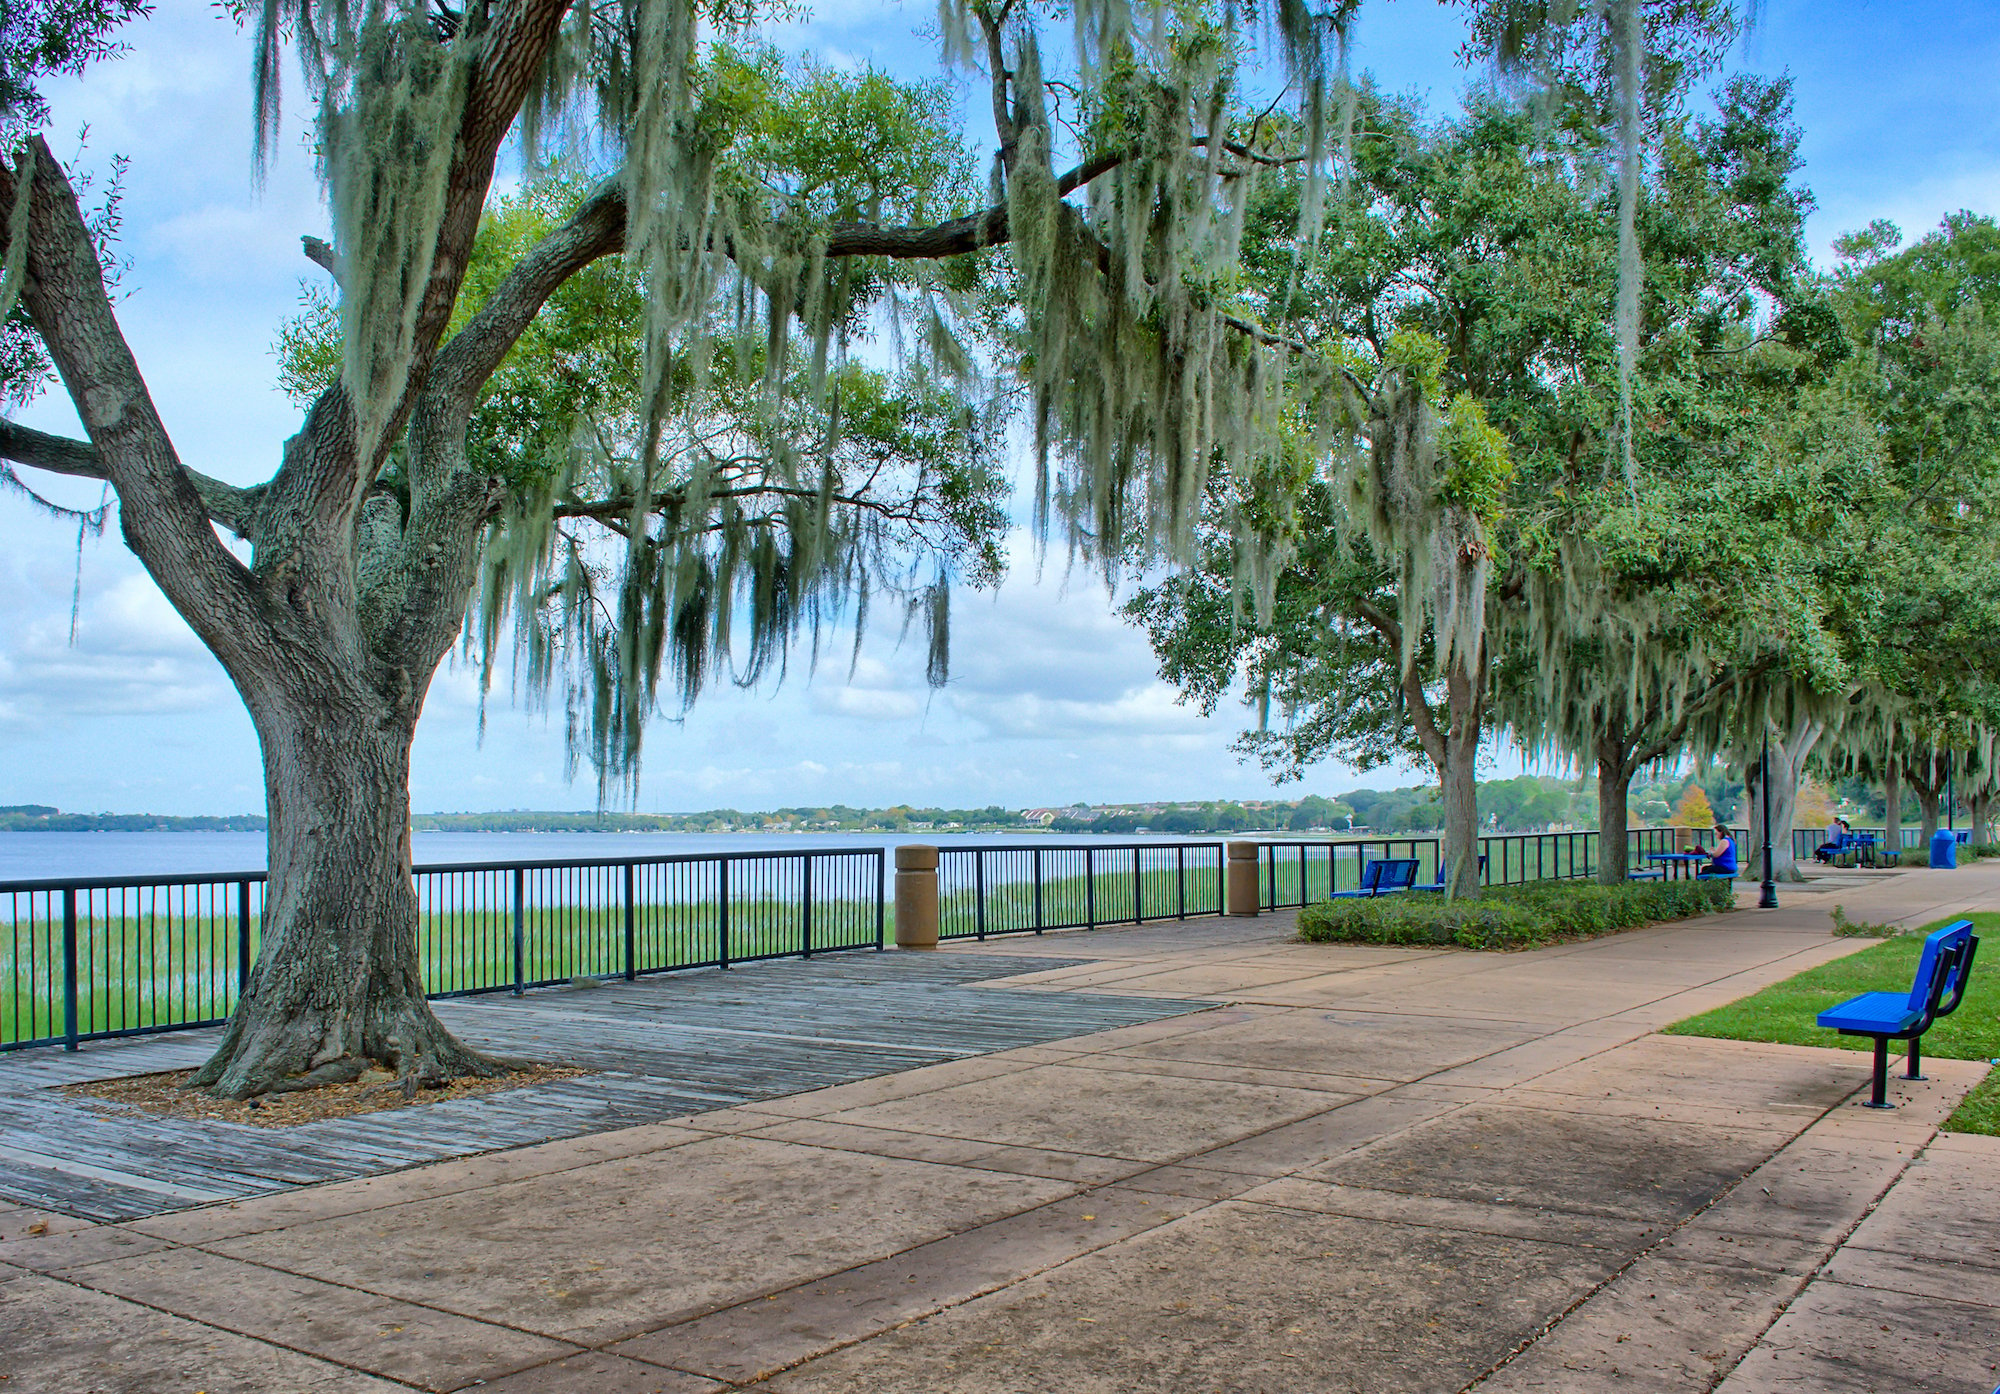 waterfront park in clermont, fl